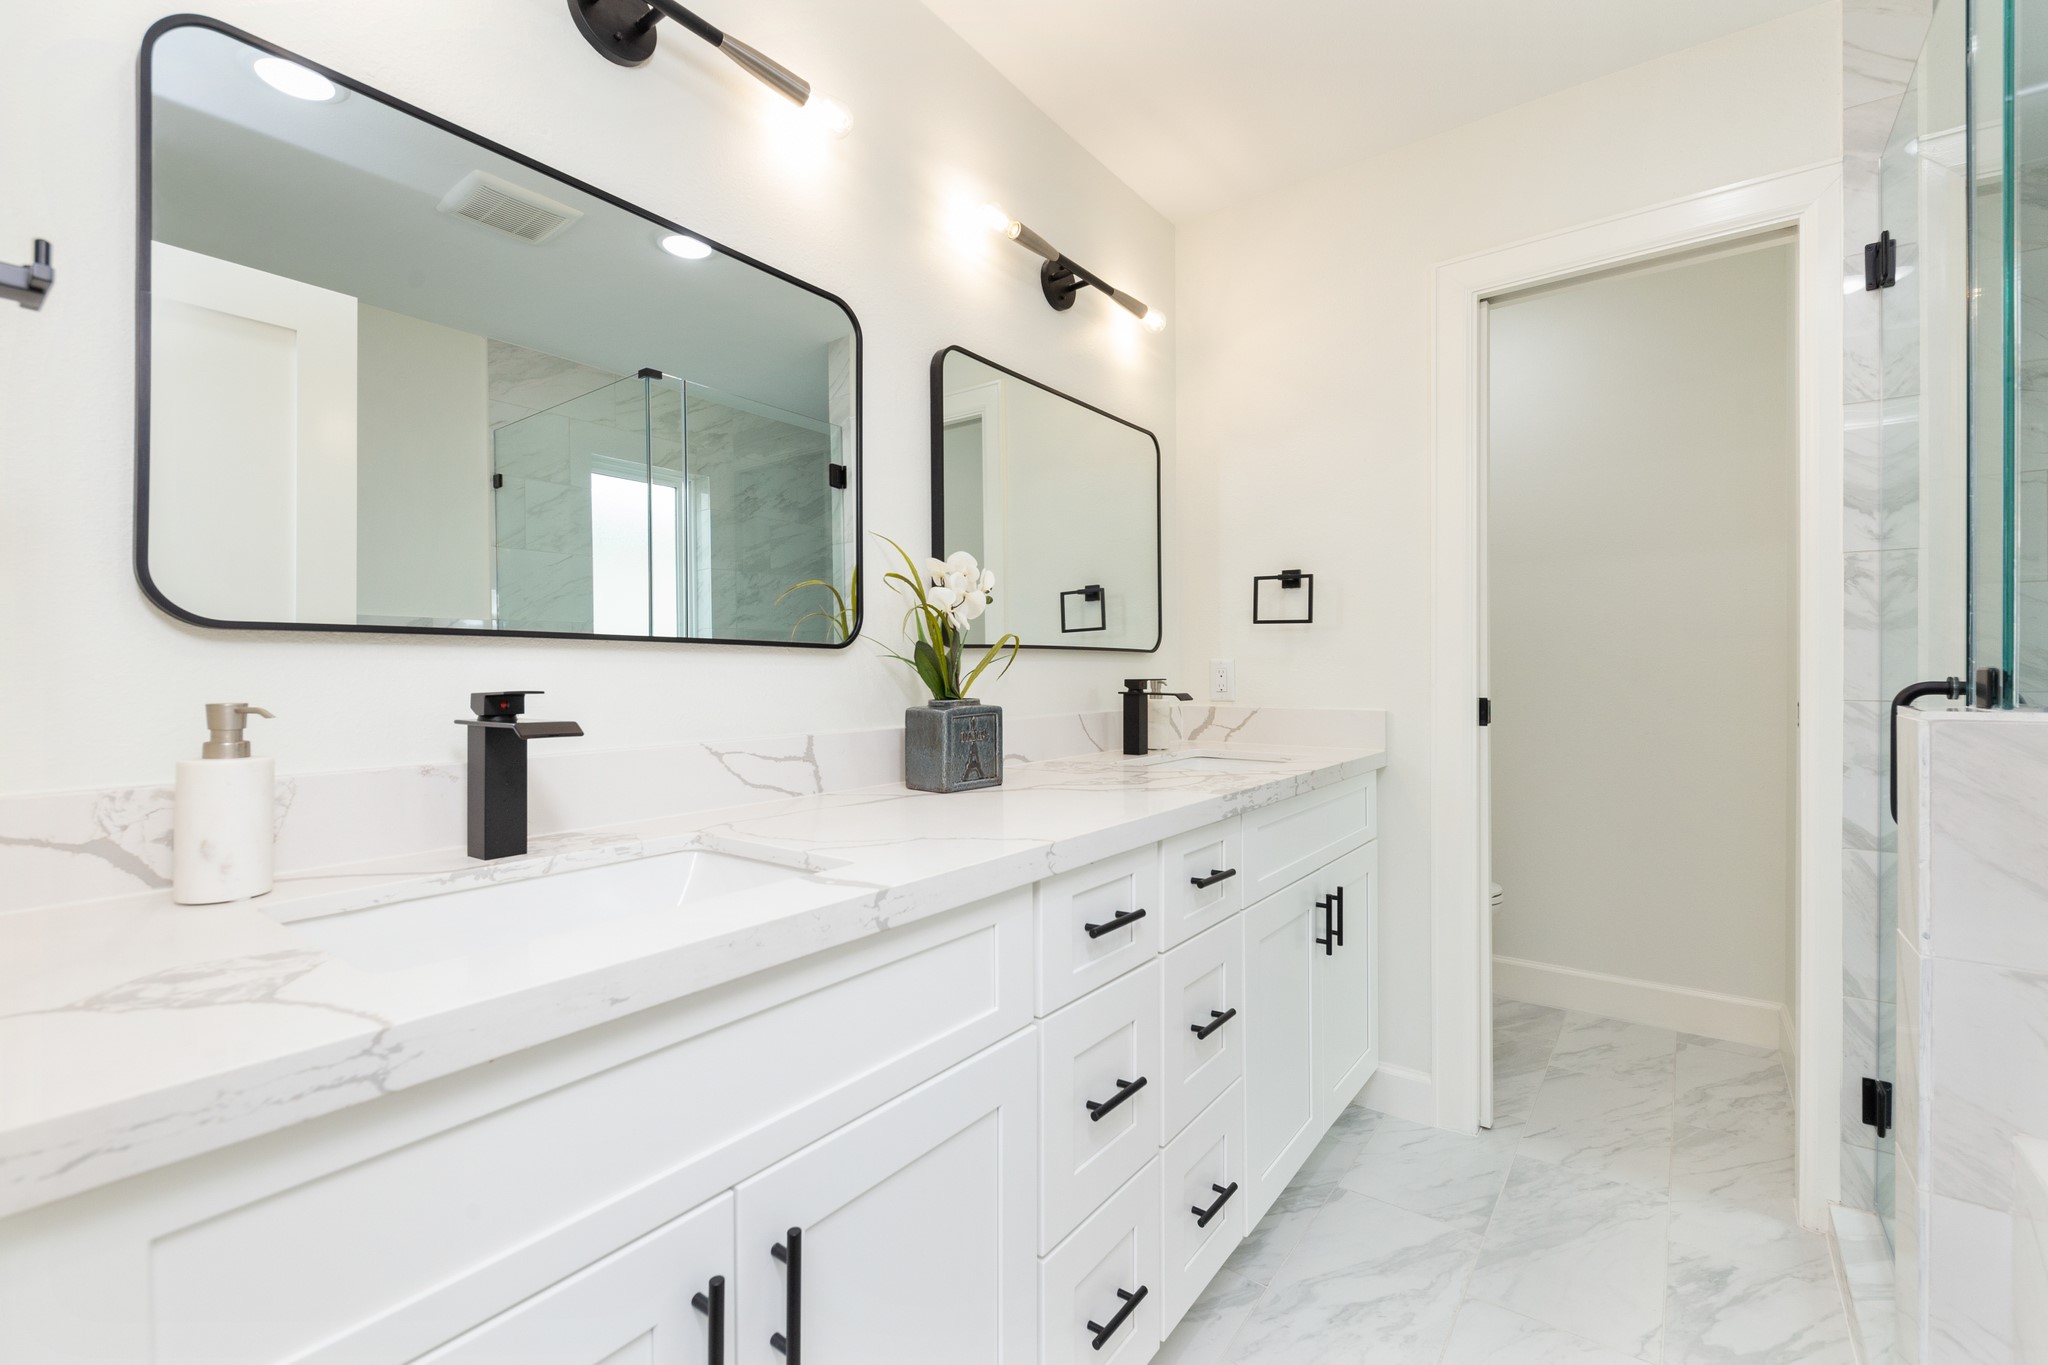 Primary bathroom features double vanities, large shower & spa like tub